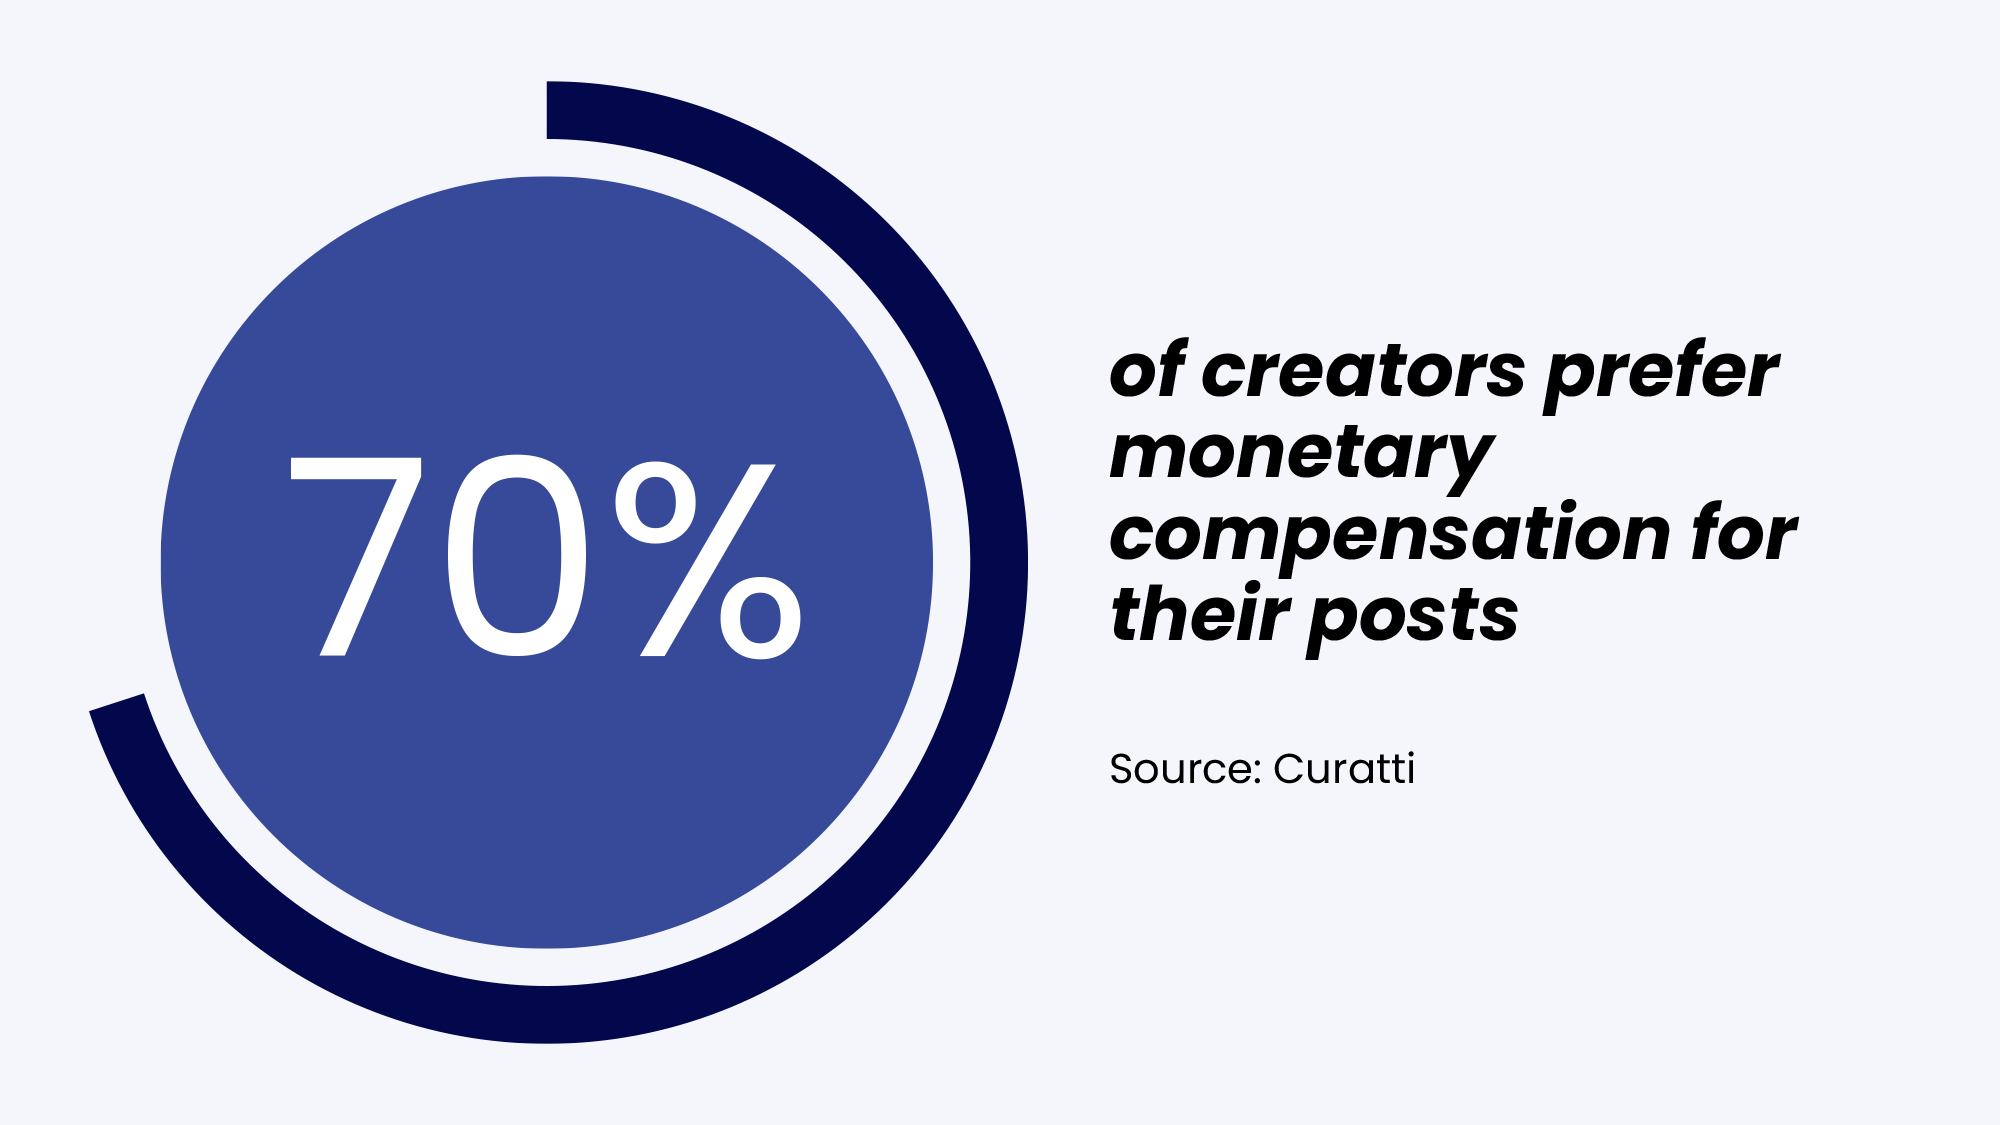 of creators prefer monetary compensation for their posts